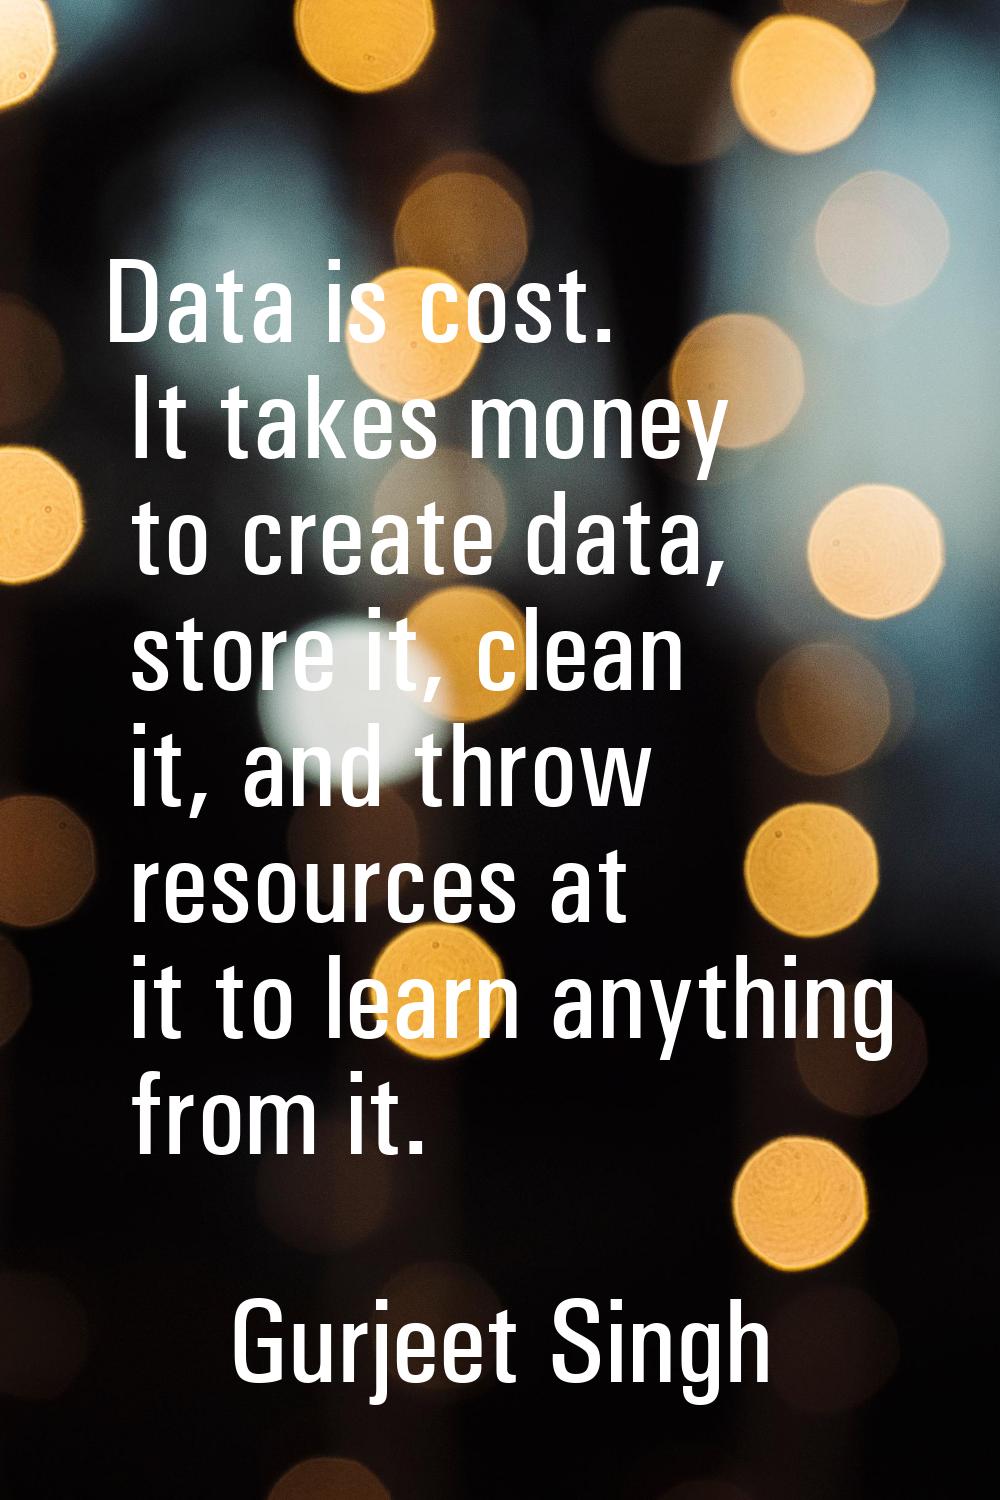 Data is cost. It takes money to create data, store it, clean it, and throw resources at it to learn